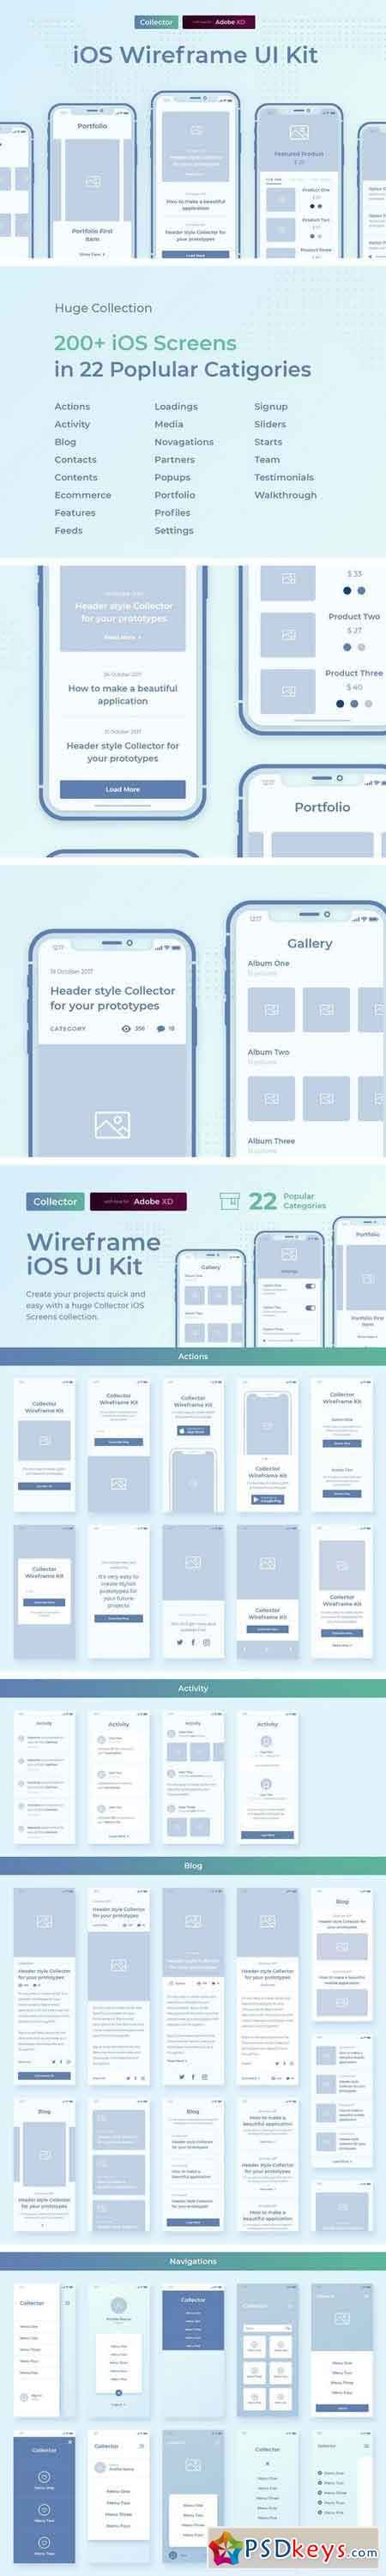 Collector iOS Wireframe UI Kit 2144499